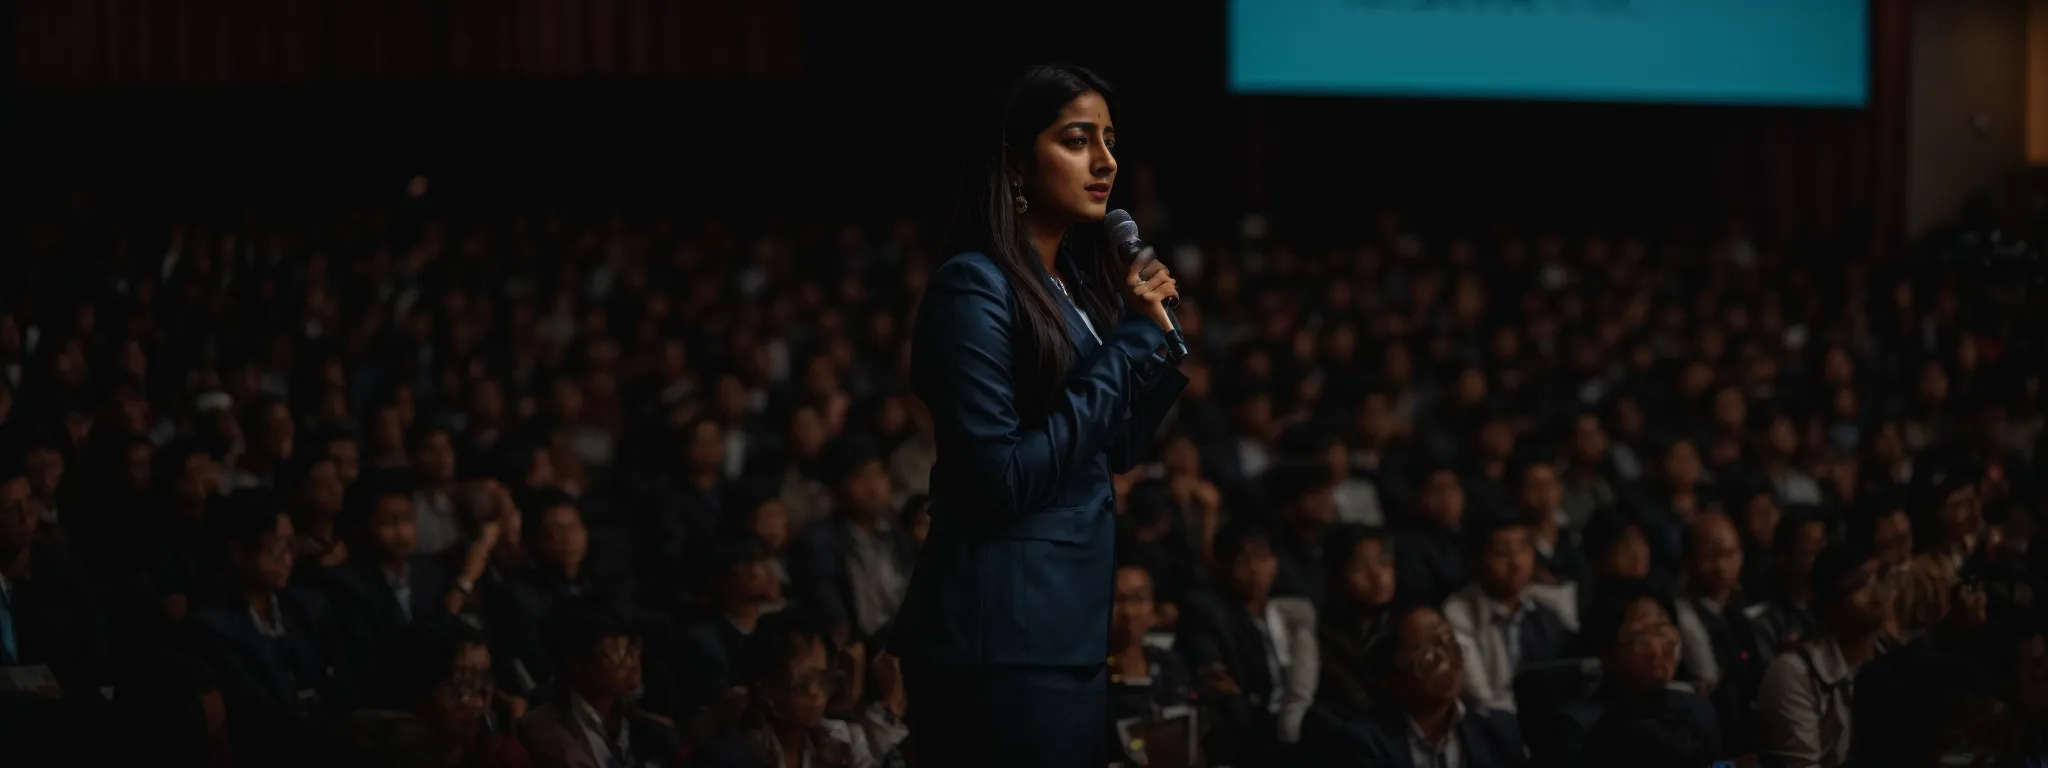 upasna gautam stands confidently on stage, addressing a captivated audience at a digital marketing conference.